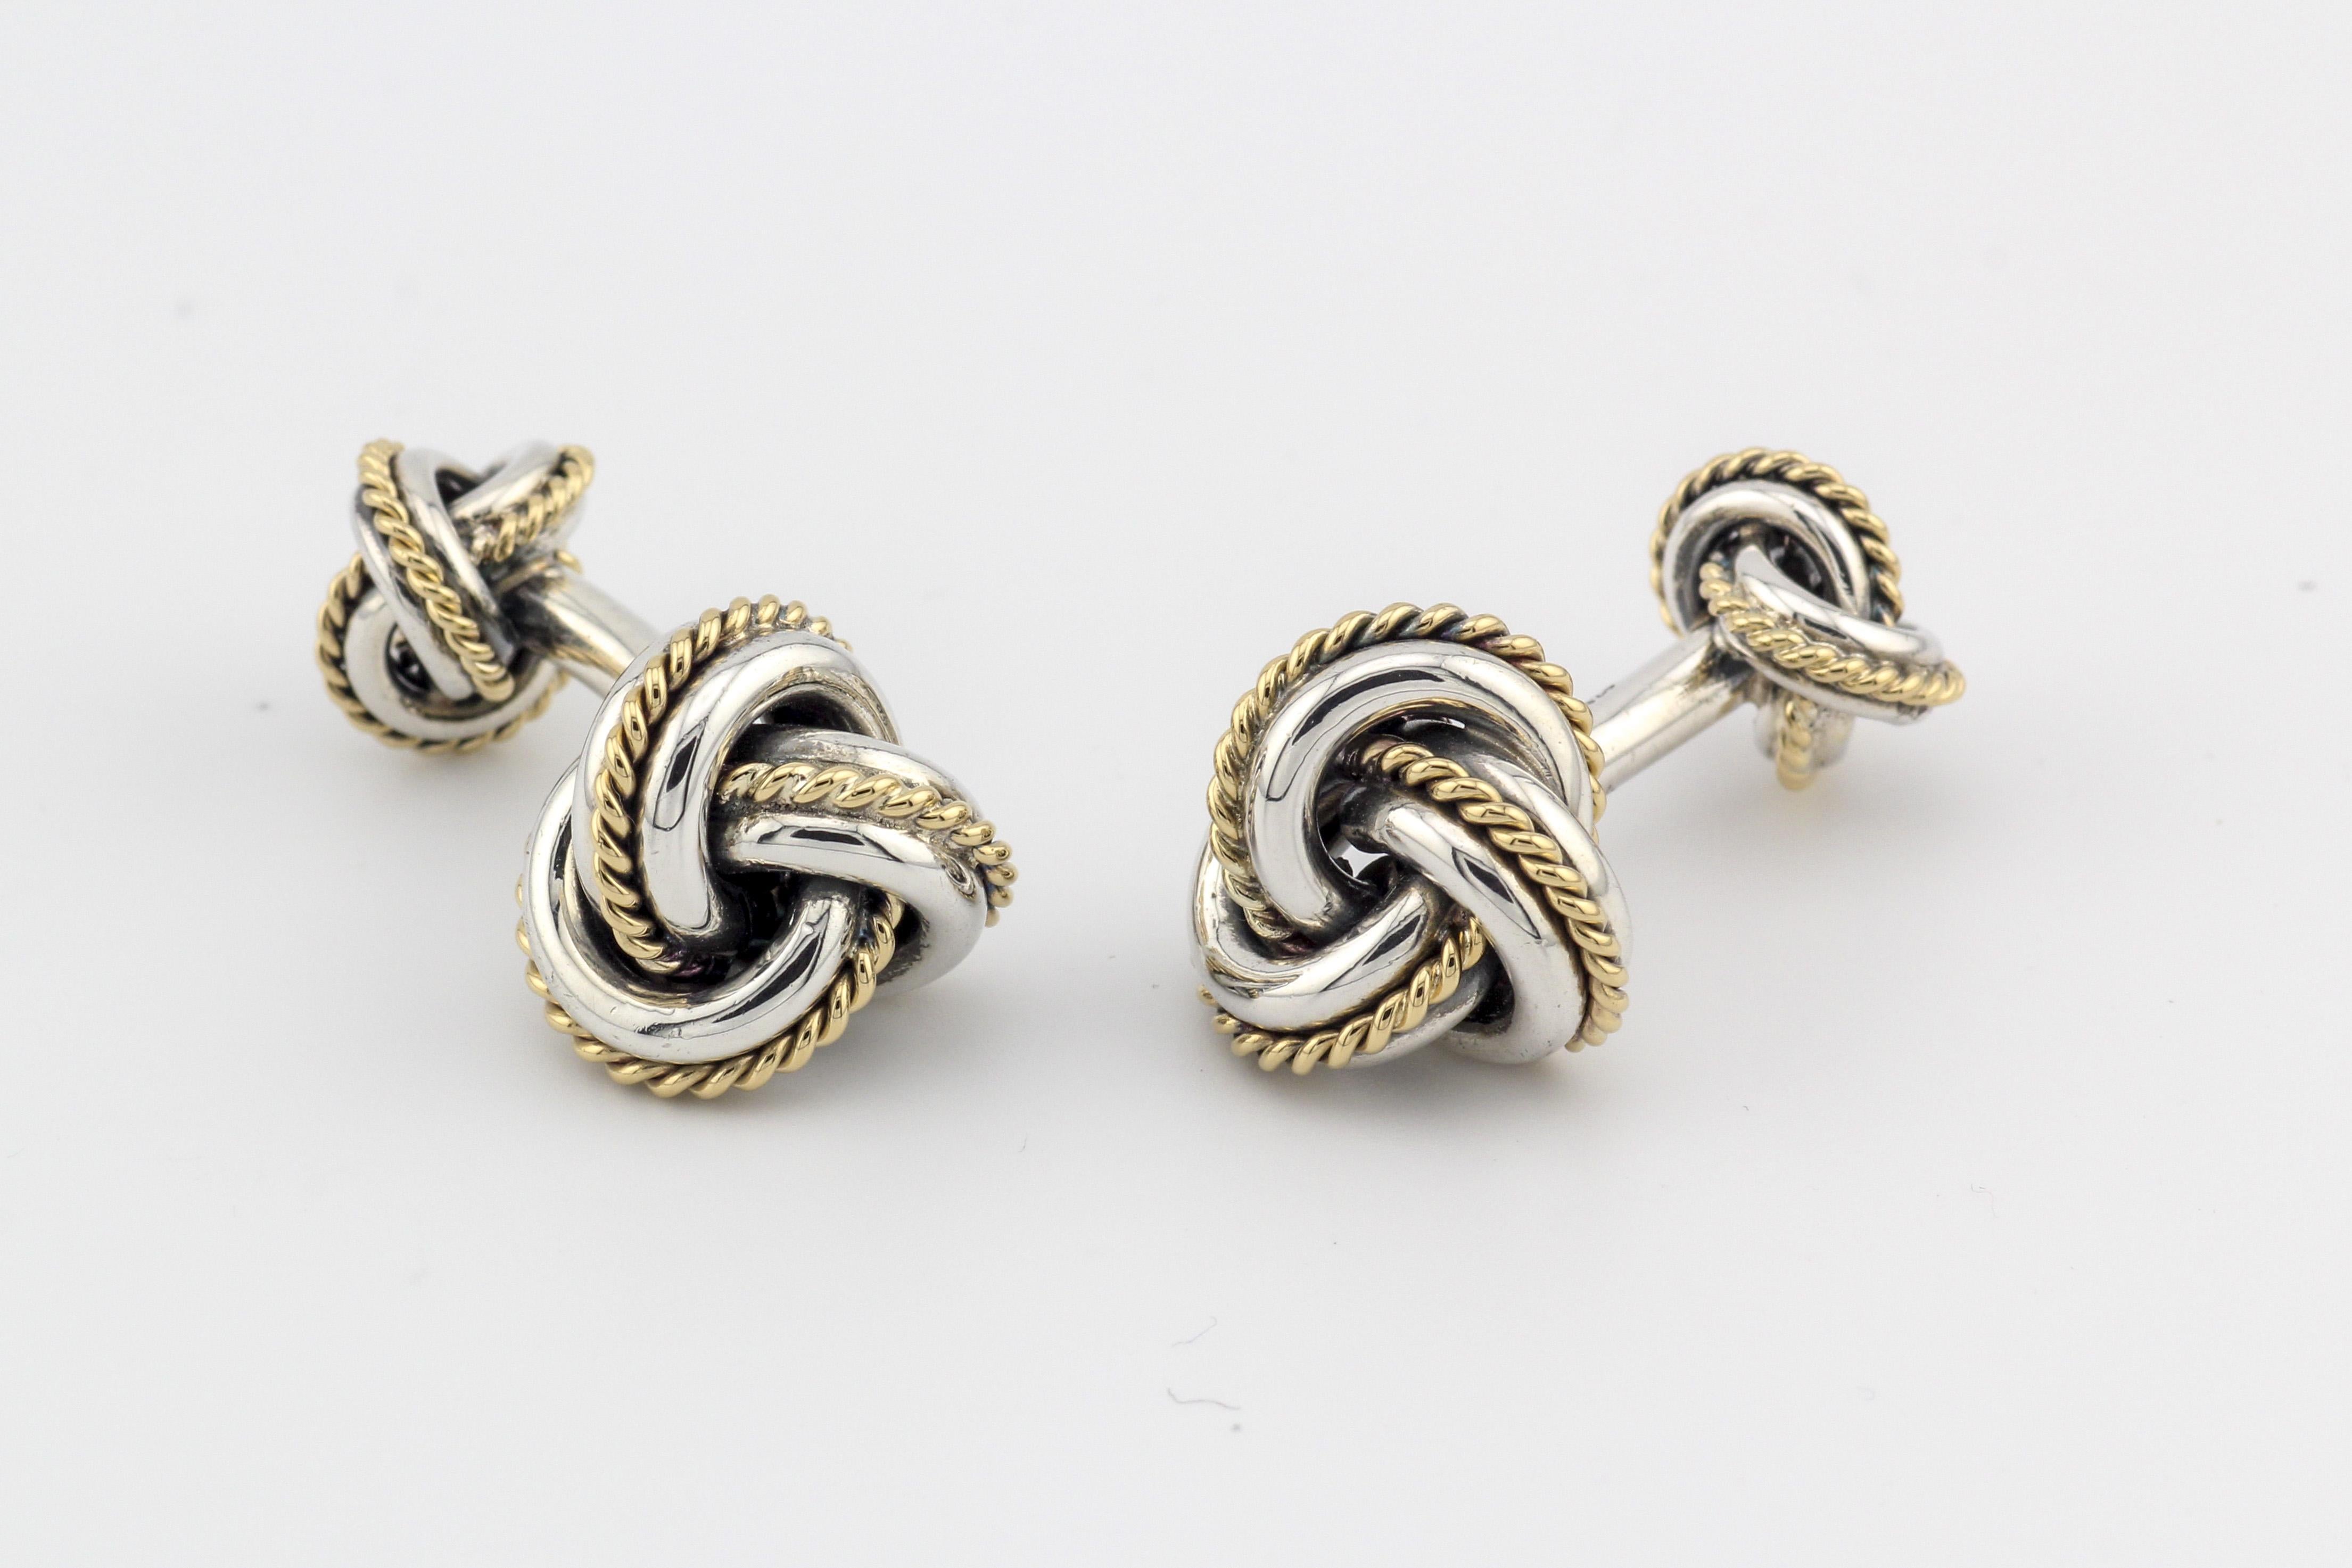 The Tiffany & Co. 18K Yellow Gold Sterling Silver Rope Knot Cufflinks are a testament to the brand's legacy of fine craftsmanship and timeless elegance. These cufflinks are a perfect fusion of luxurious 18K yellow gold and sterling silver, resulting